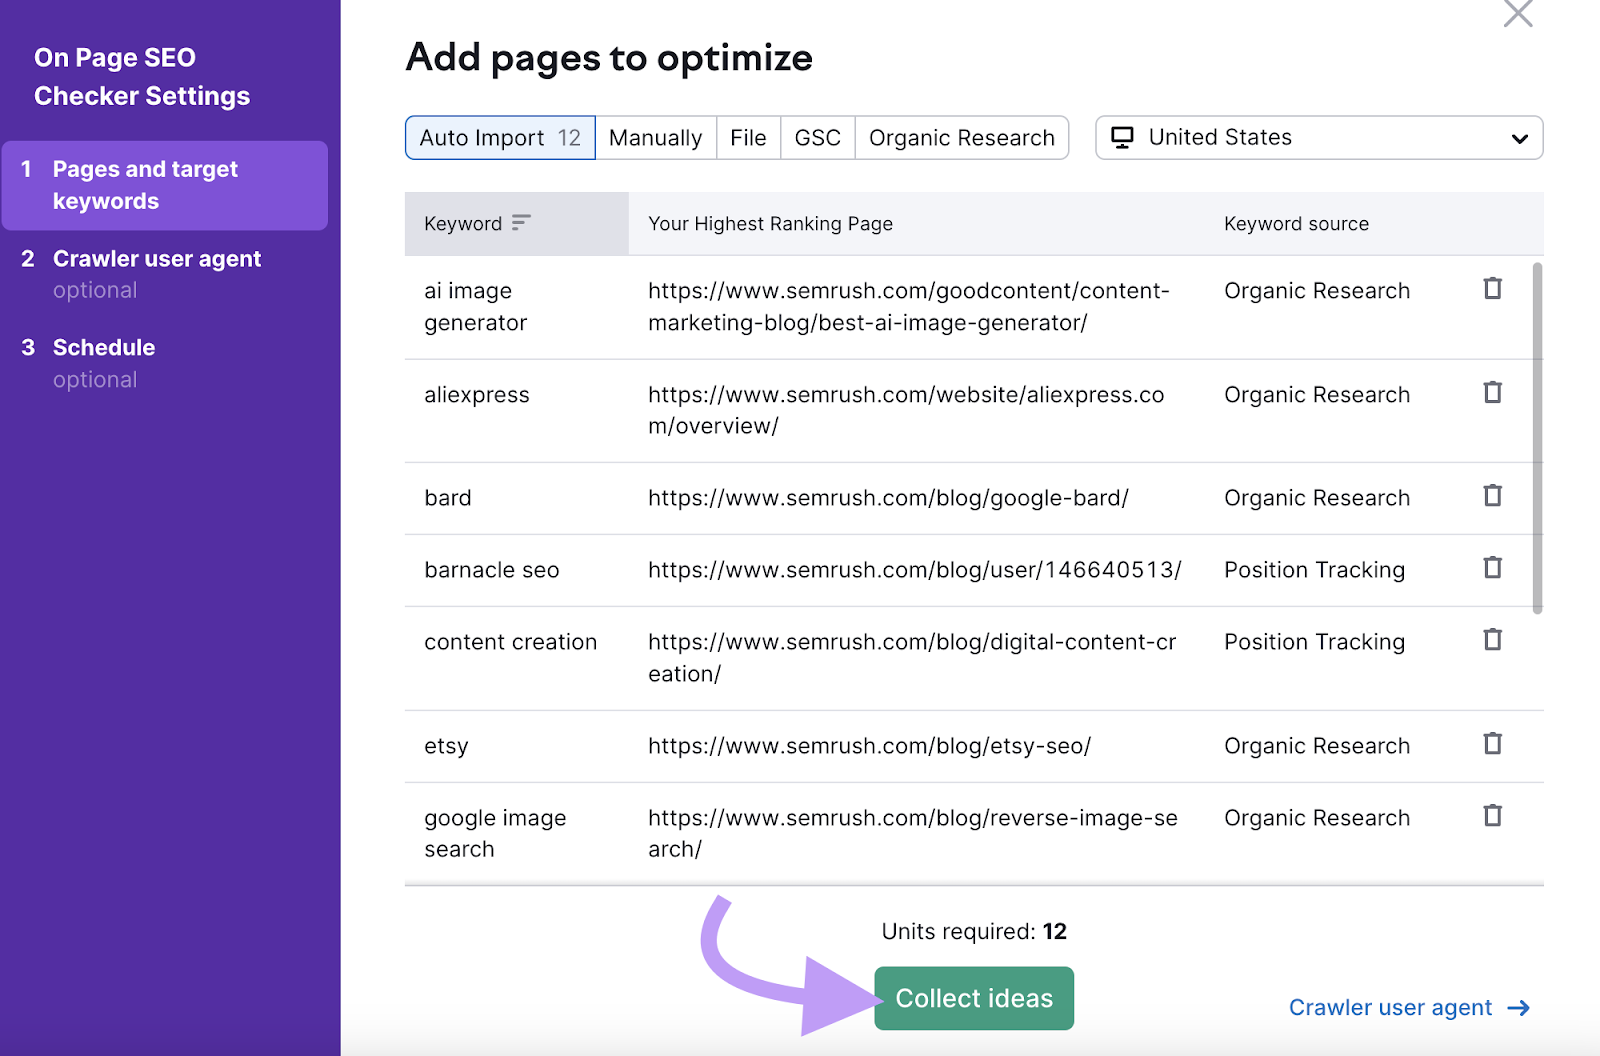 add pages to optimize in On Page SEO Checker configuration window